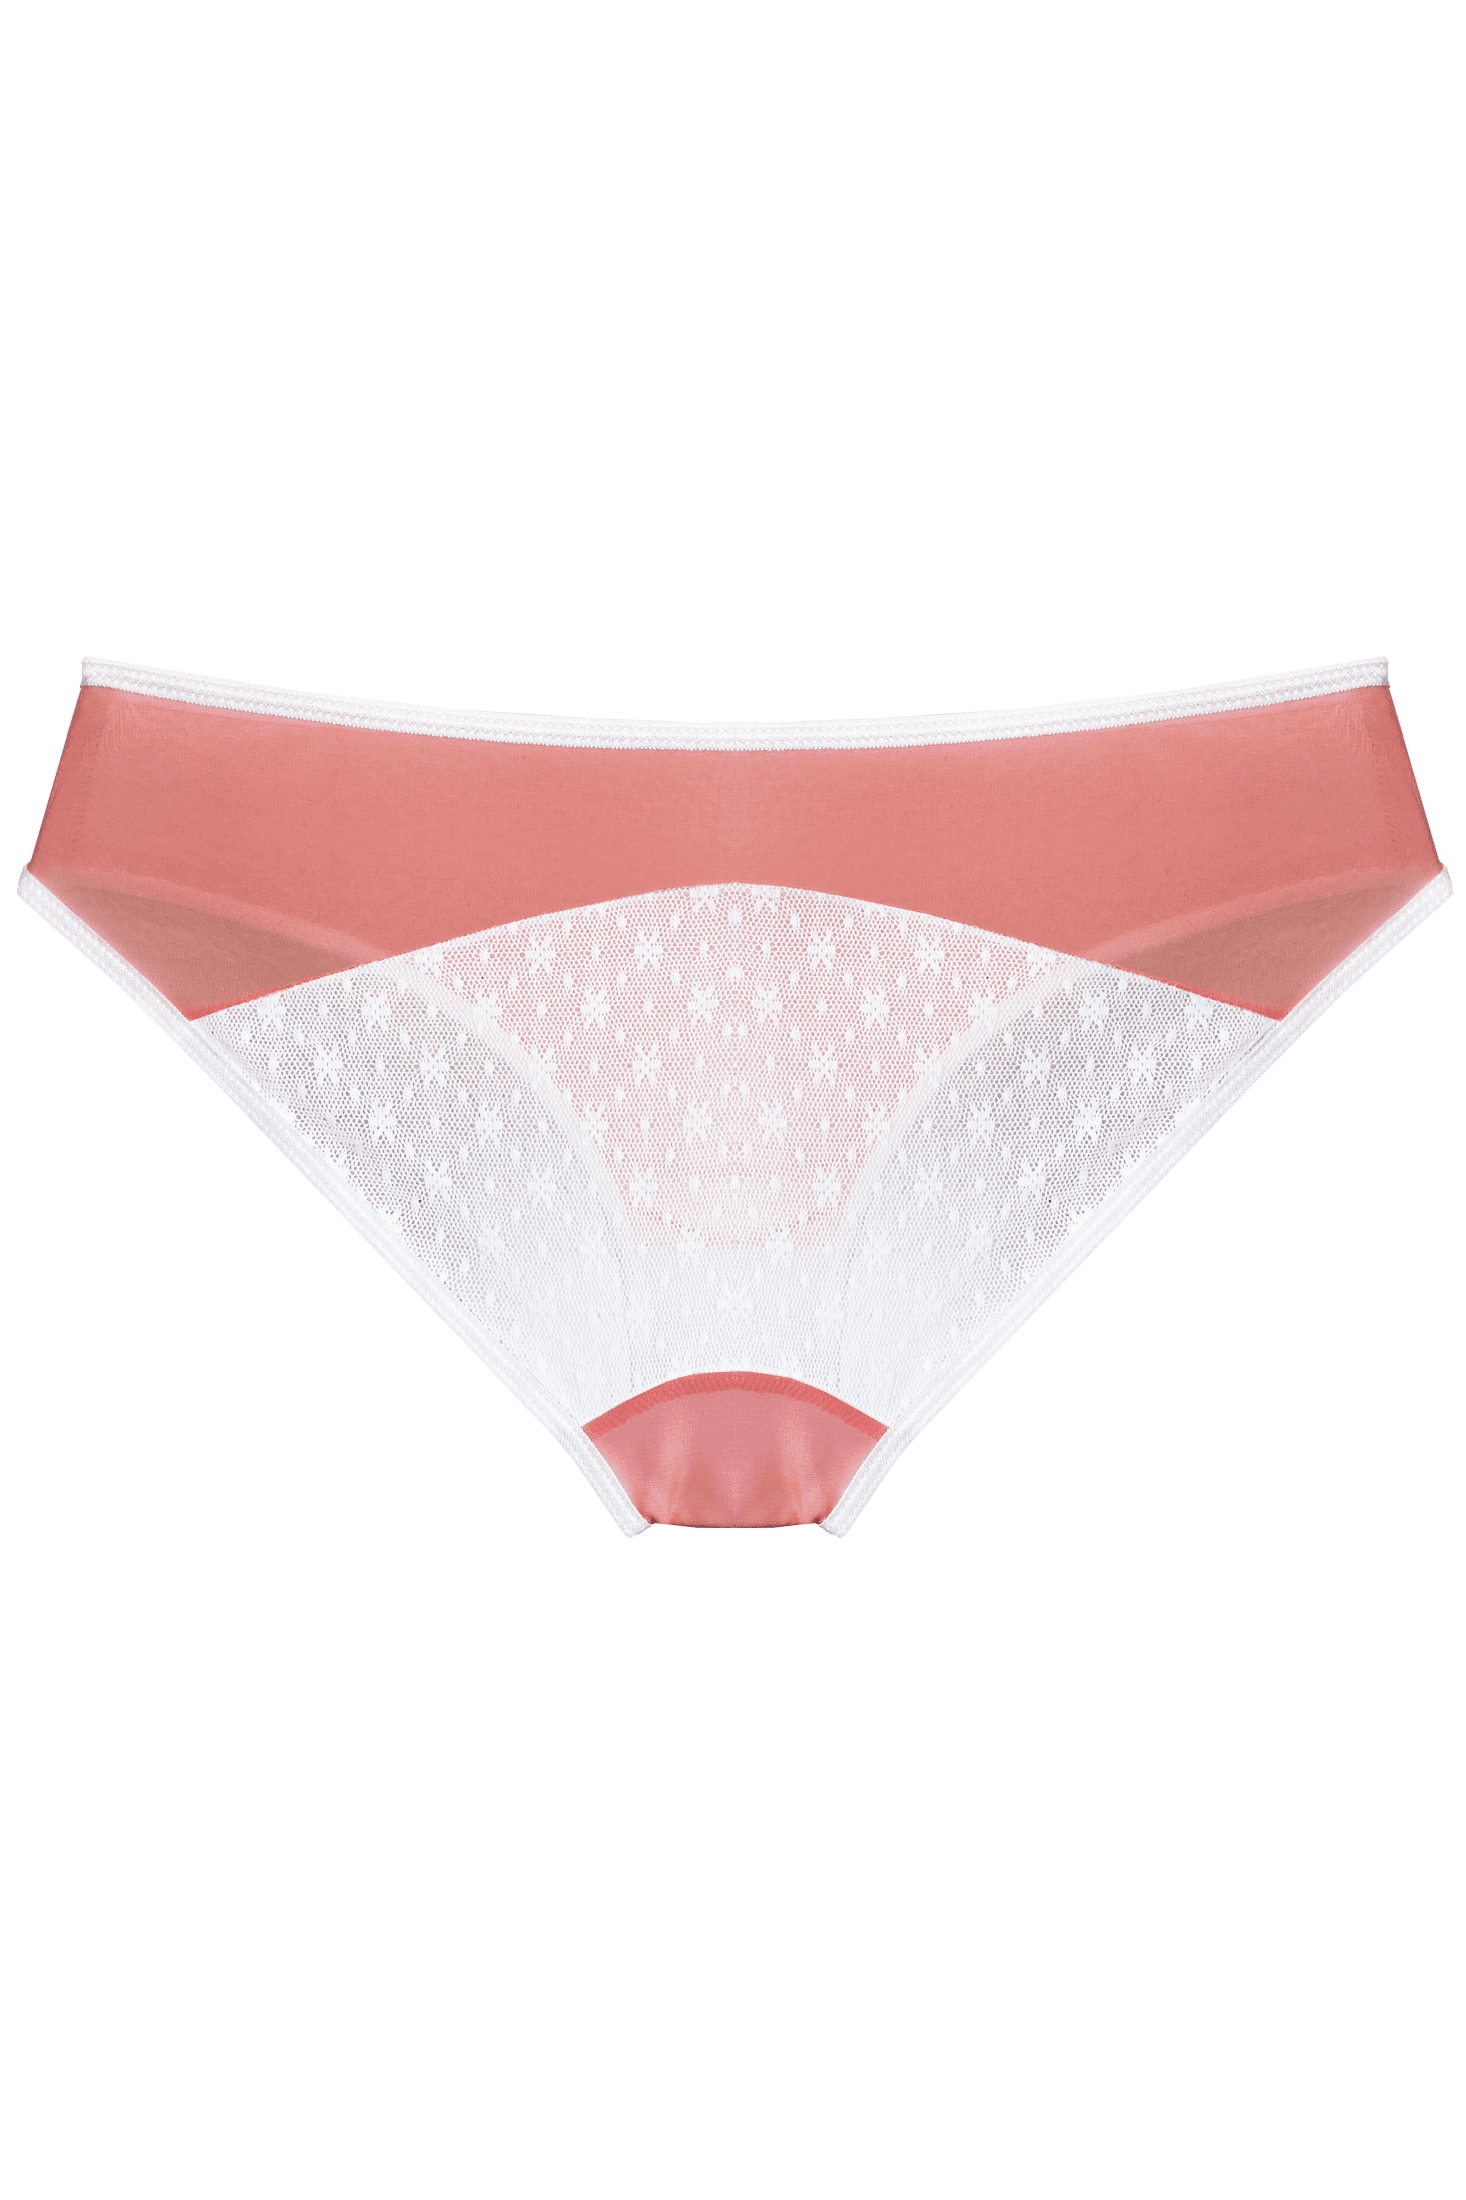 LL CORAL BRIEF - Lingerie Letters